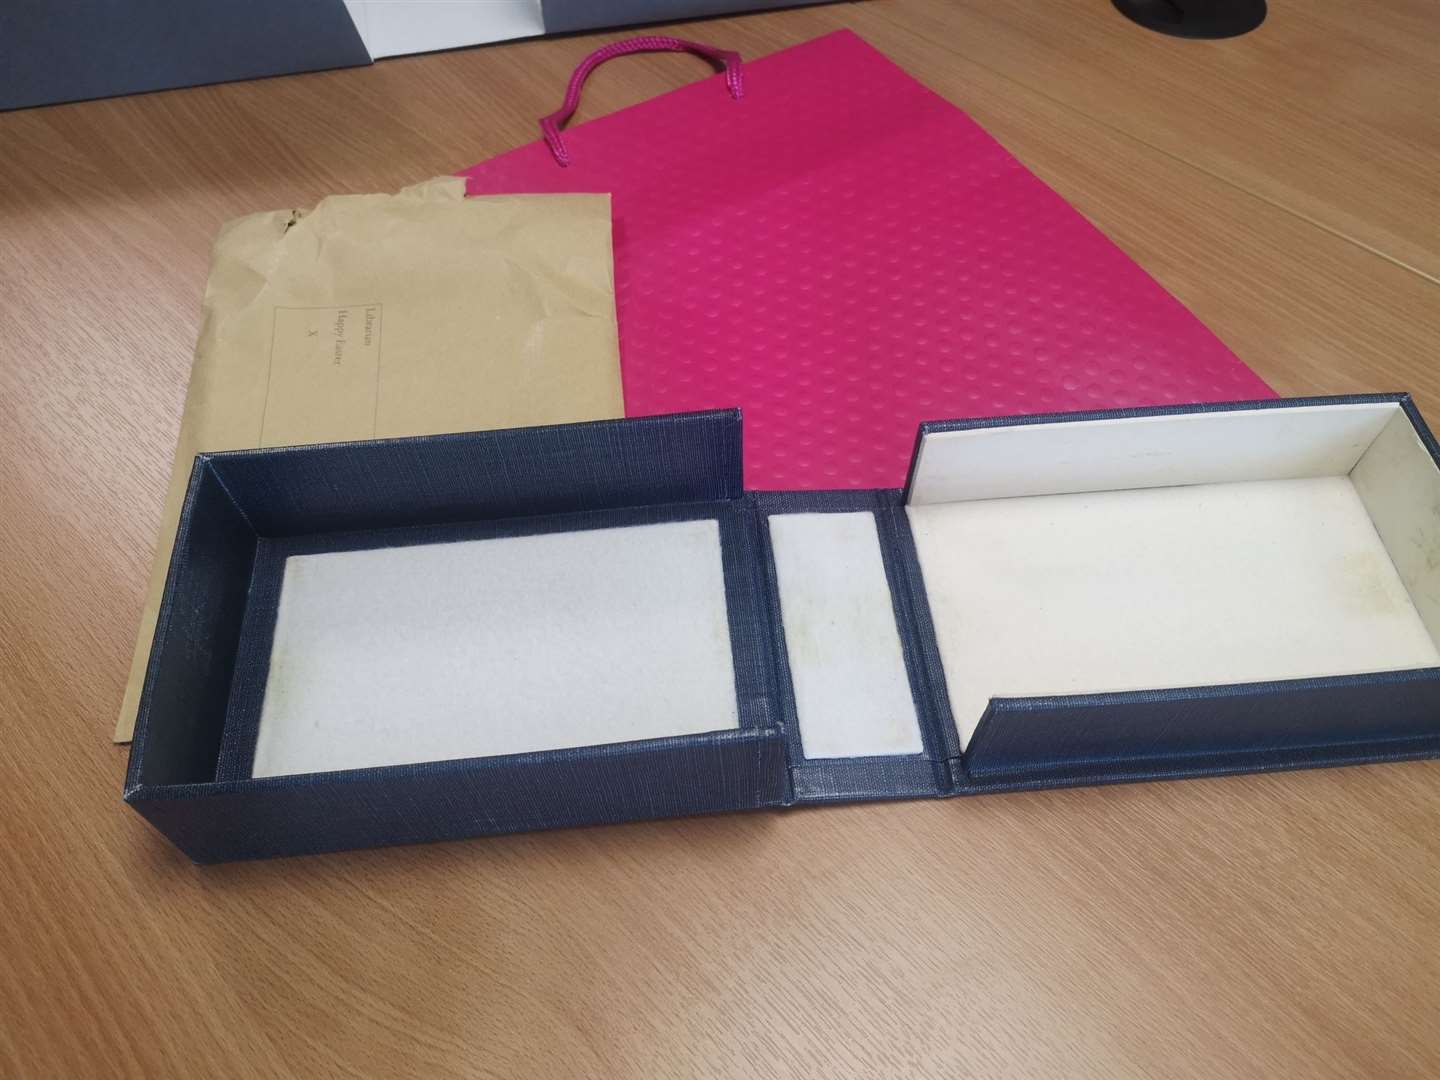 The pink gift bag that contained two Charles Darwin manuscripts that were anonymously returned to Cambridge University Library. (Cambridge University Library/ PA)